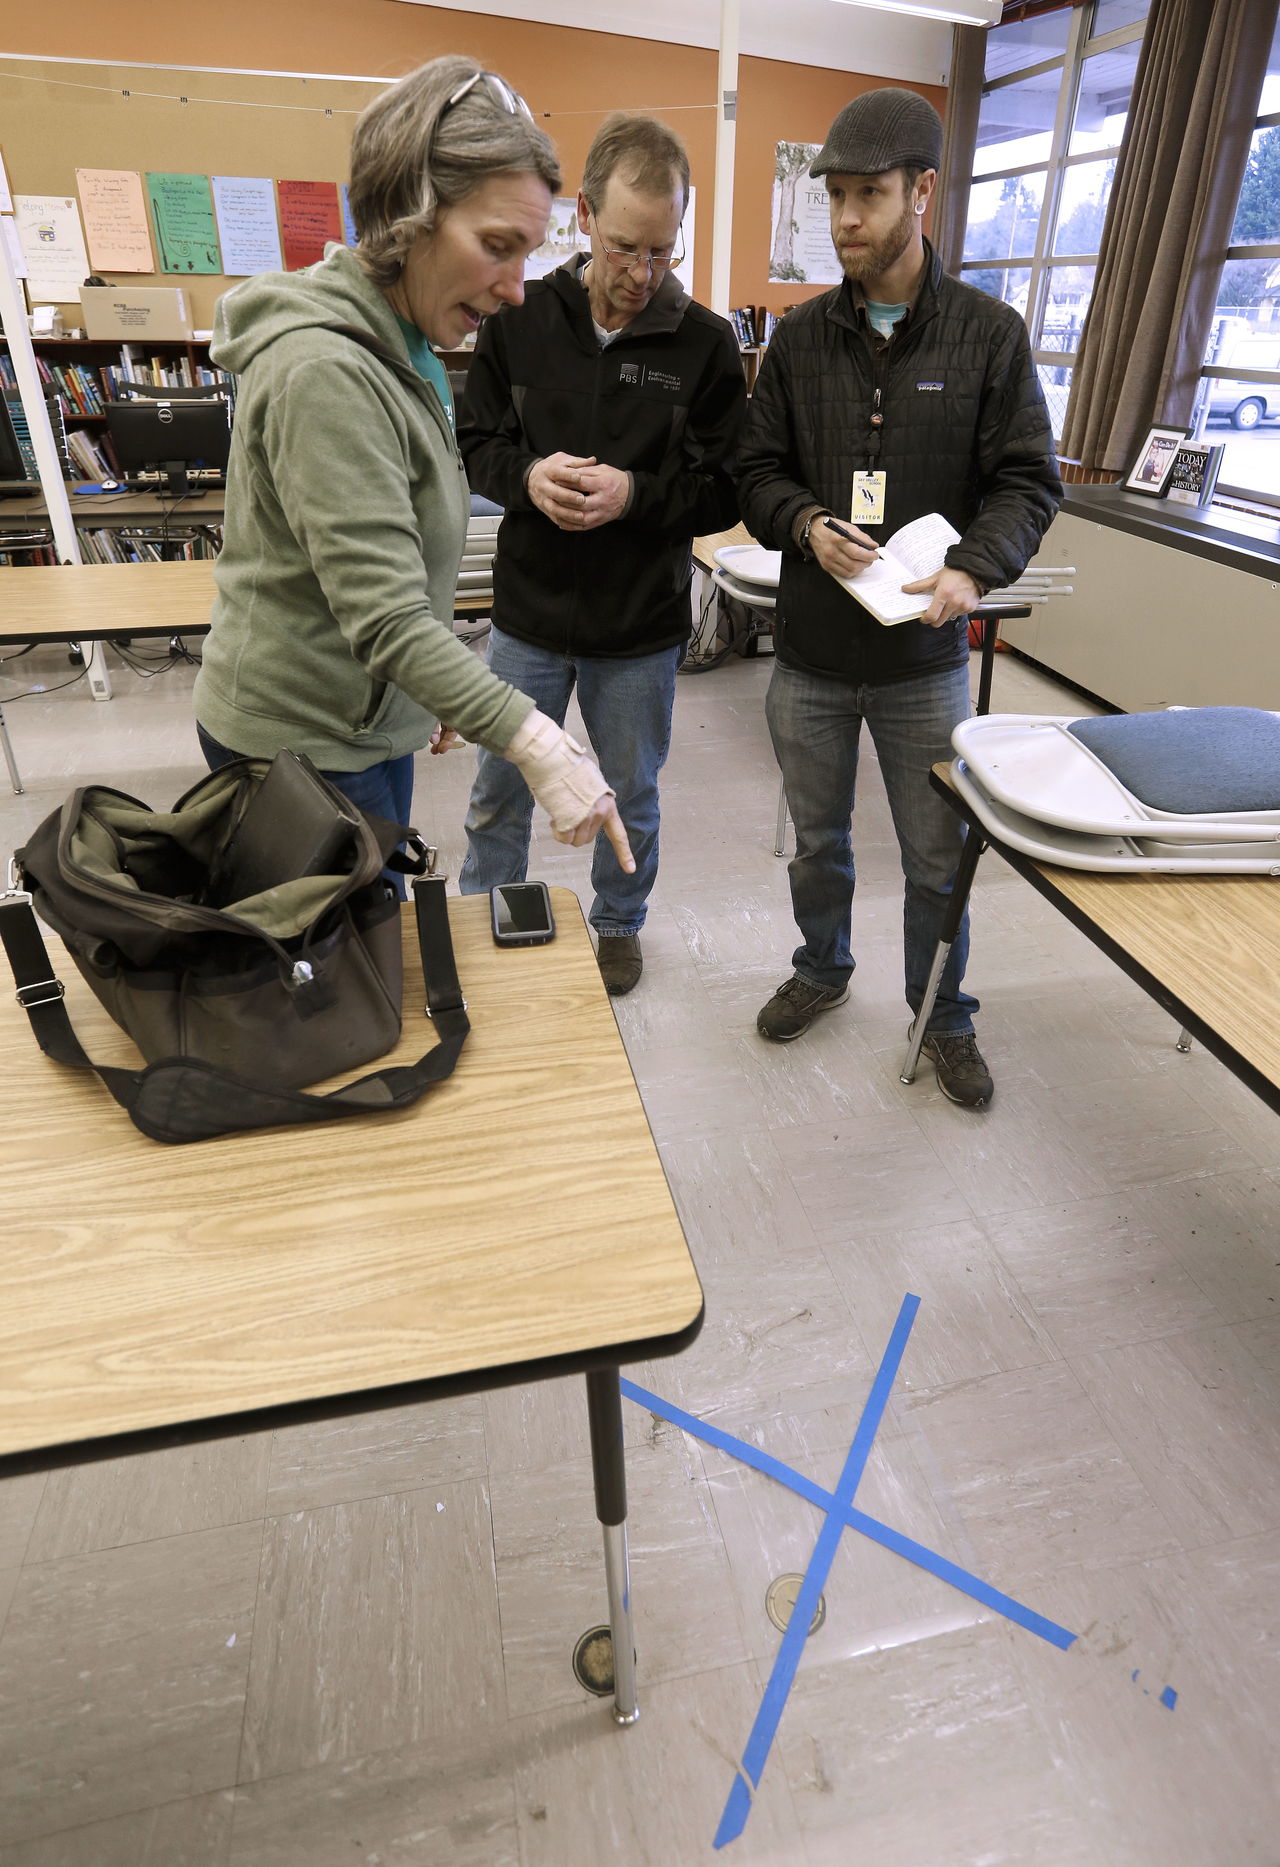 Teacher Heidi Engle helps pinpoint an area of a stain as Gregg Middaugh and Kevin Hood, from PBS Engineering + Environmental, take notes Jan. 26 at a classroom at Sky Valley Education Center in Monroe. The trio then marked the spot so a swipe sample could be taken and analyzed to see if there was contamination that could be causing some students and staff to become sick.